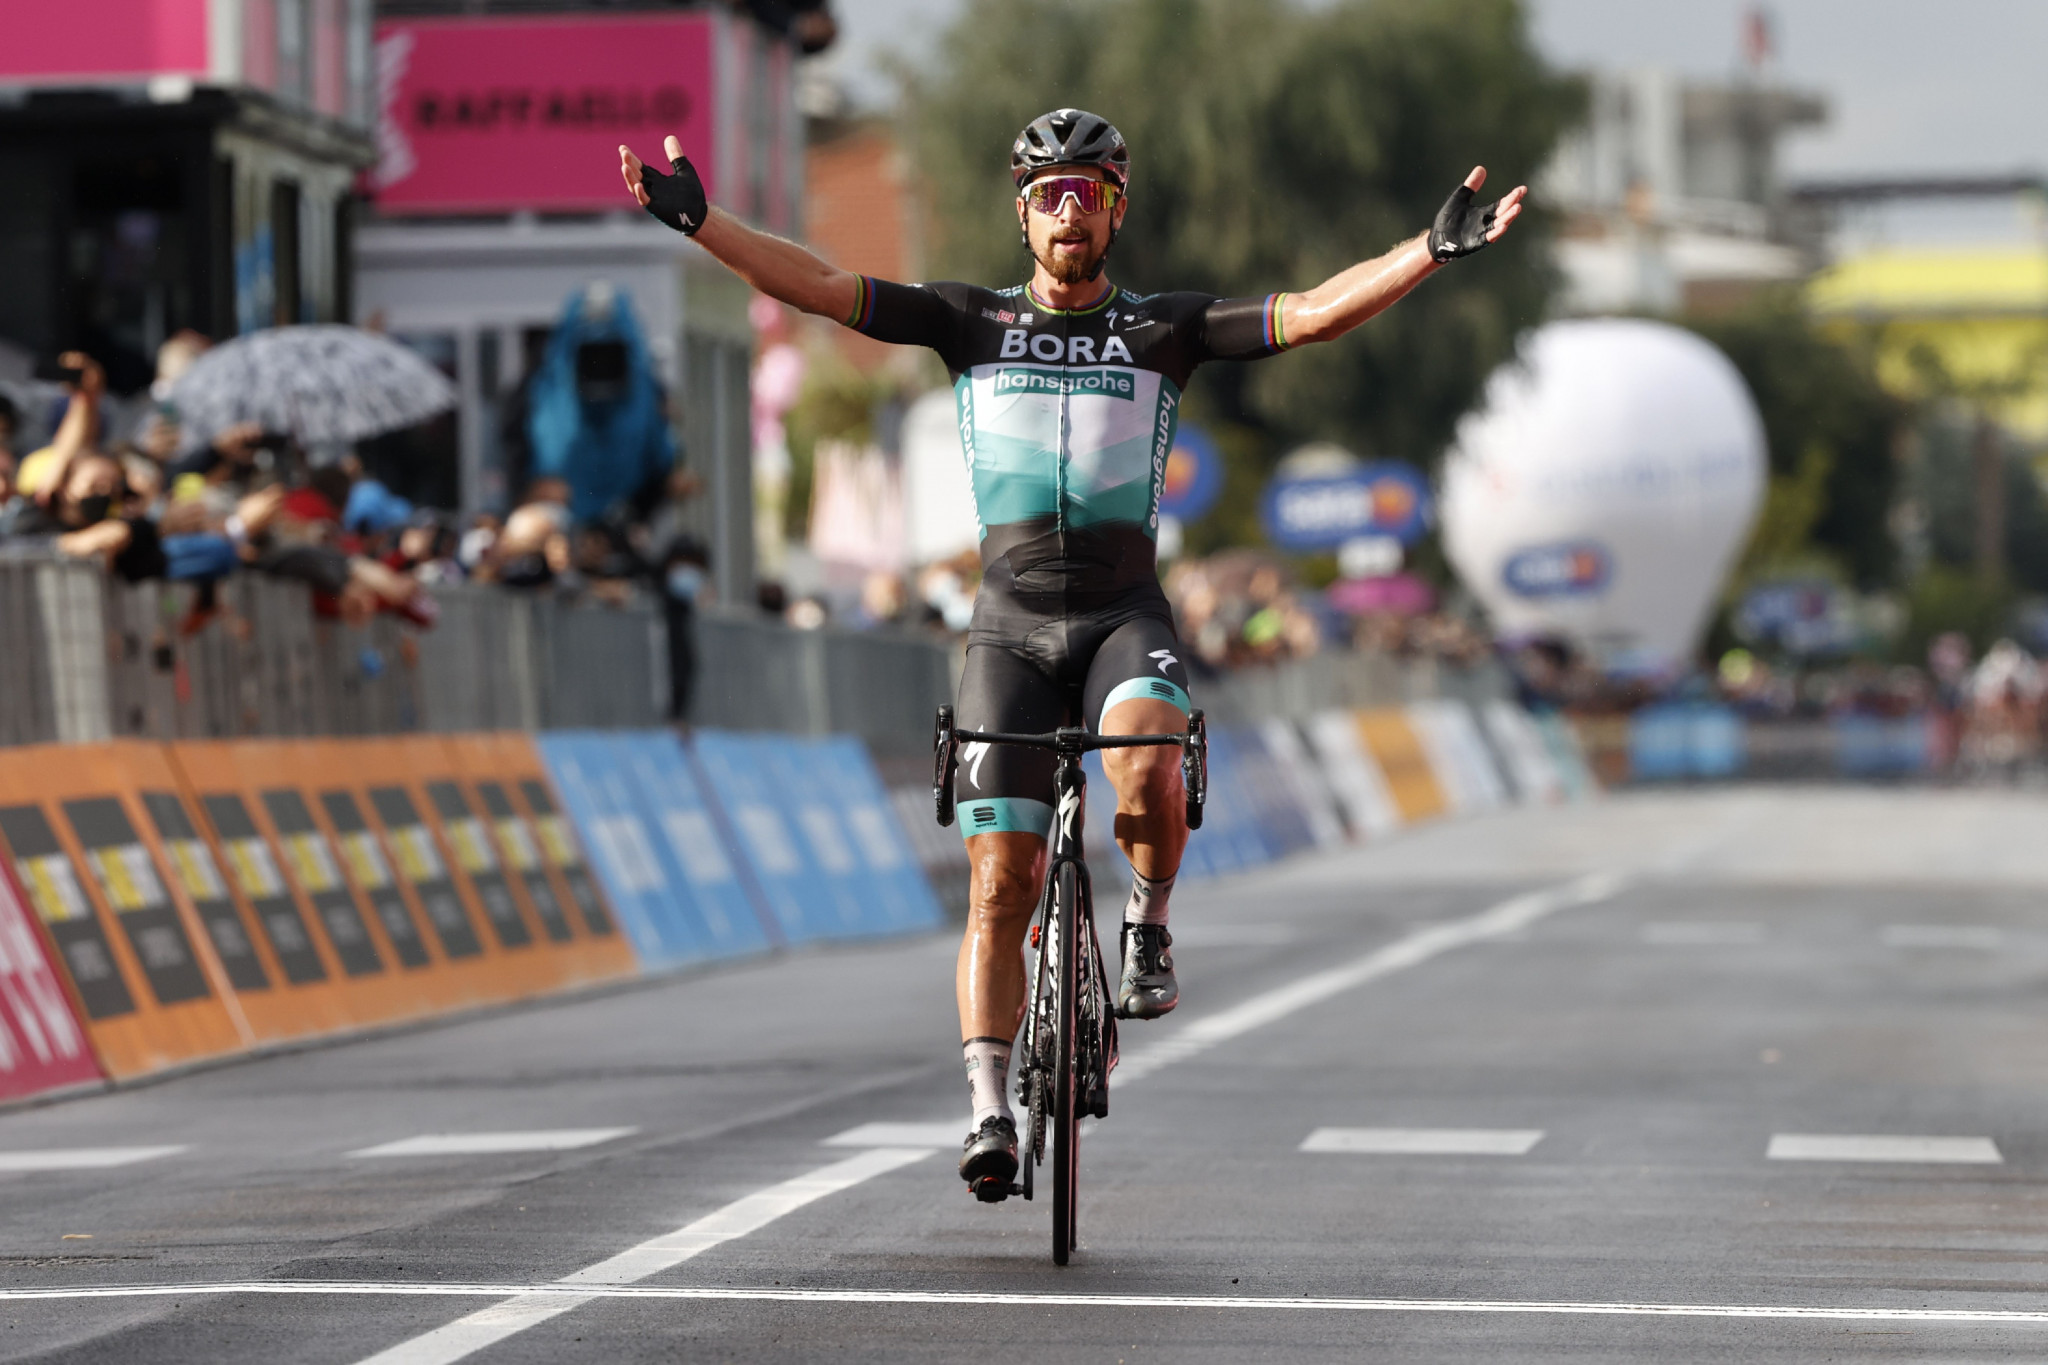 Sagan solos to win first Giro d'Italia stage after attack from breakaway